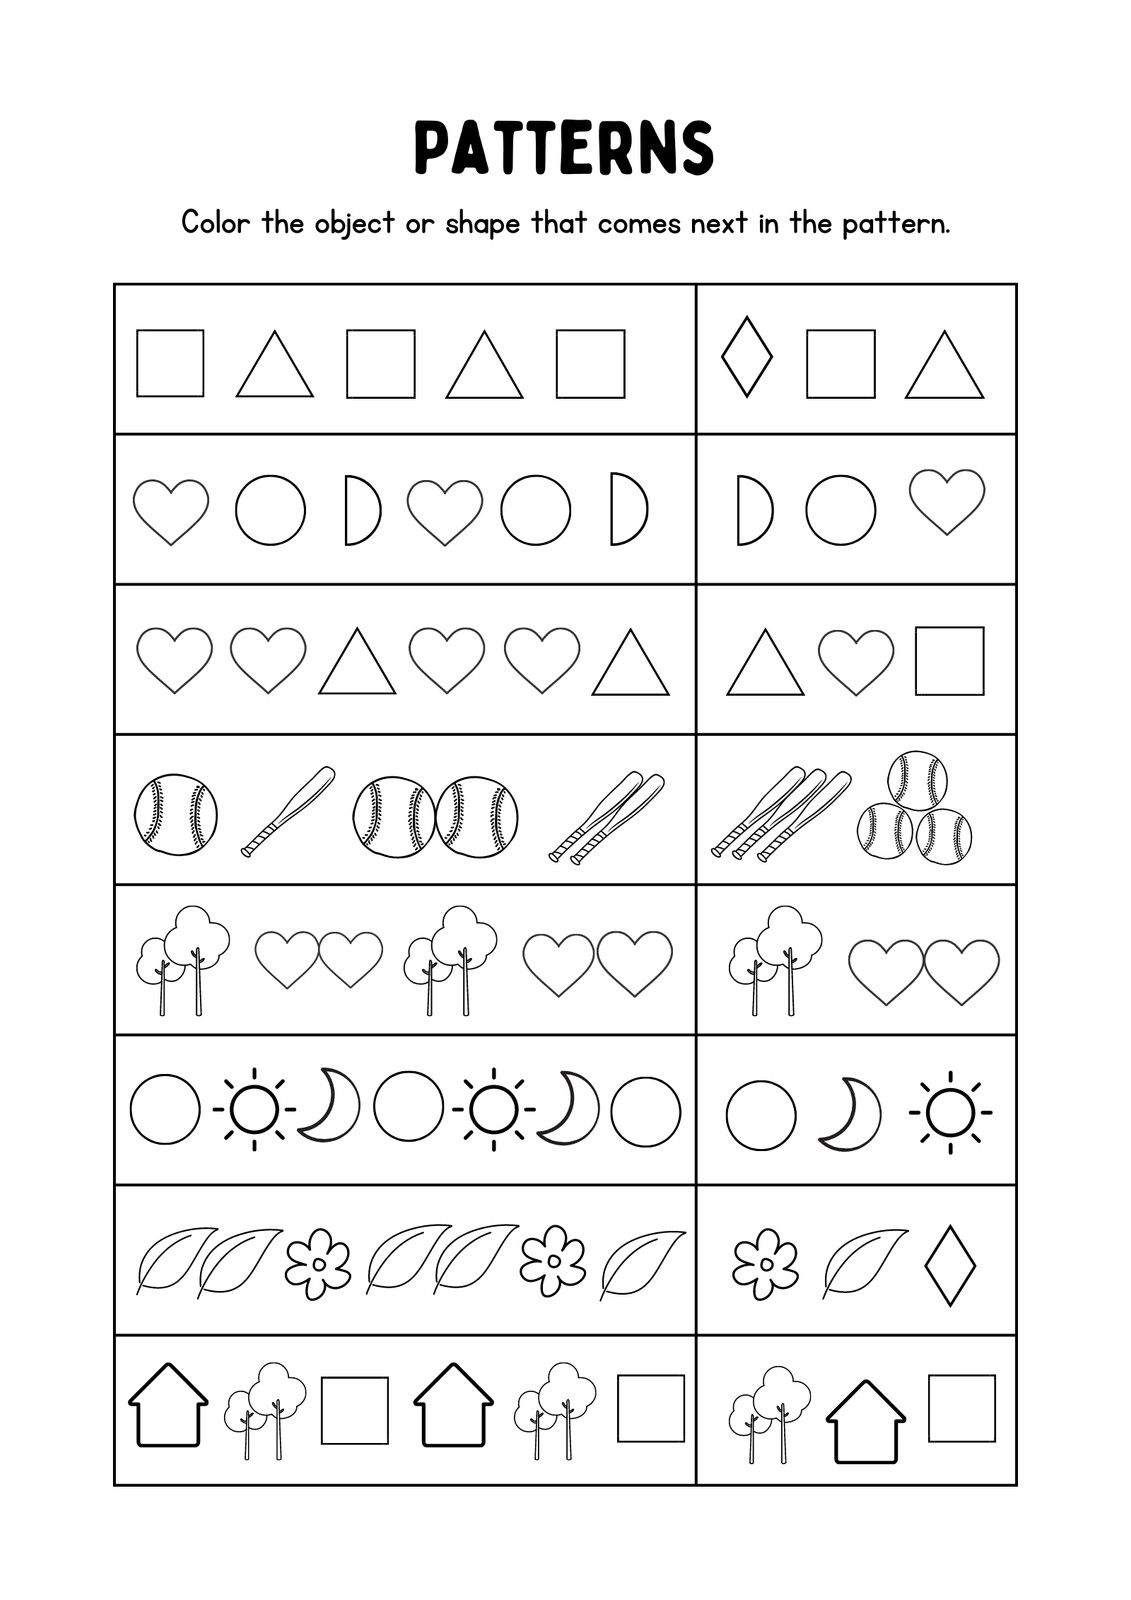 Free and customizable pattern templates